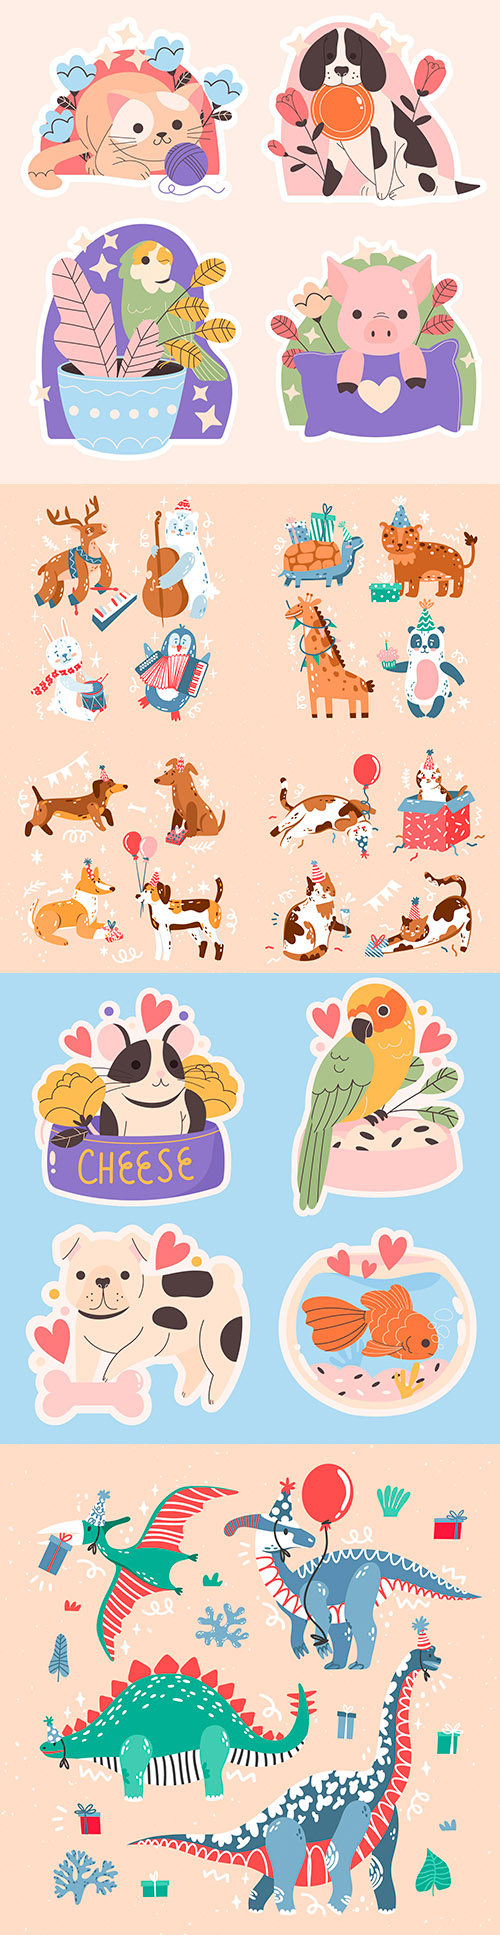 Animal cute collection of pictured birthday illustrations
